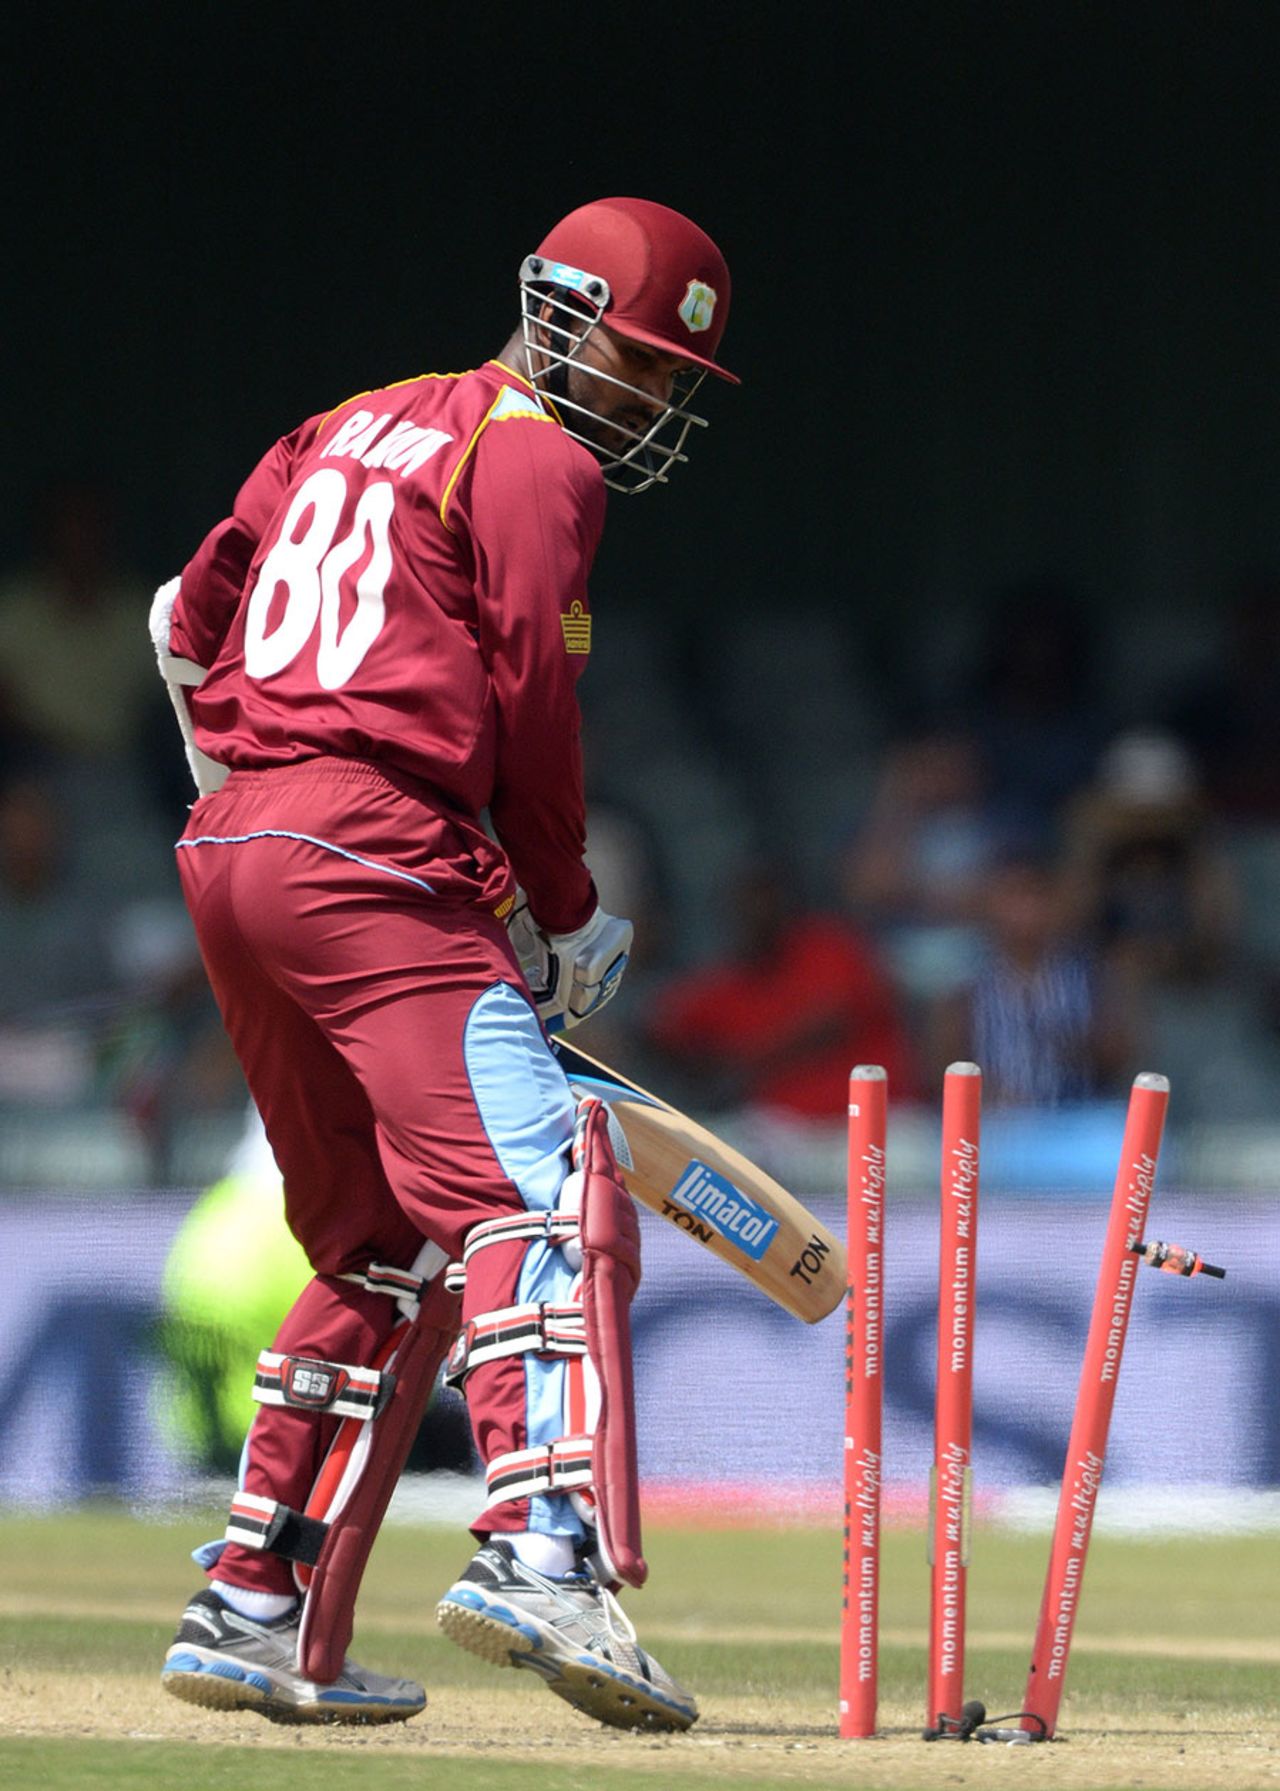 Denesh Ramdin chopped Dale Steyn into his stumps, South Africa v West Indies, 3rd ODI, East London, January 21, 2015